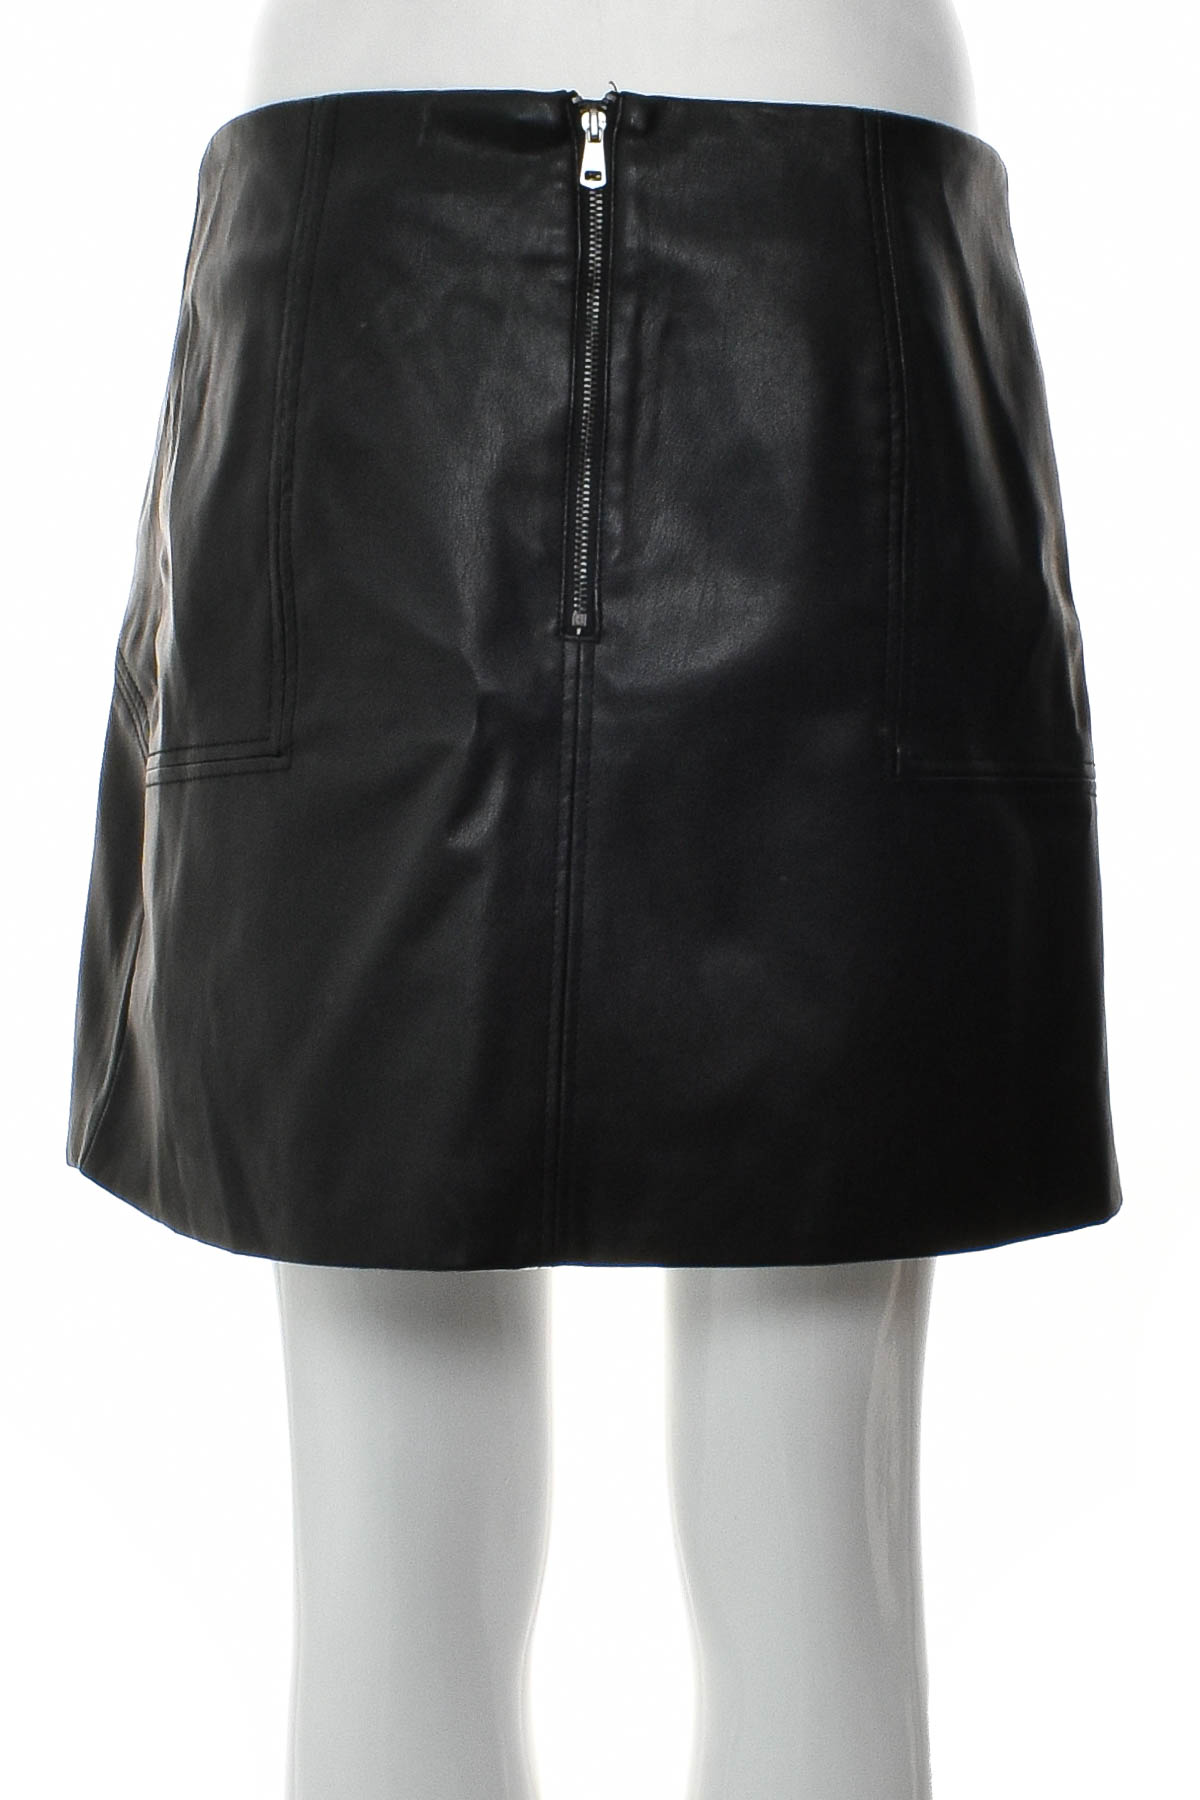 Leather skirt - H&M - 1